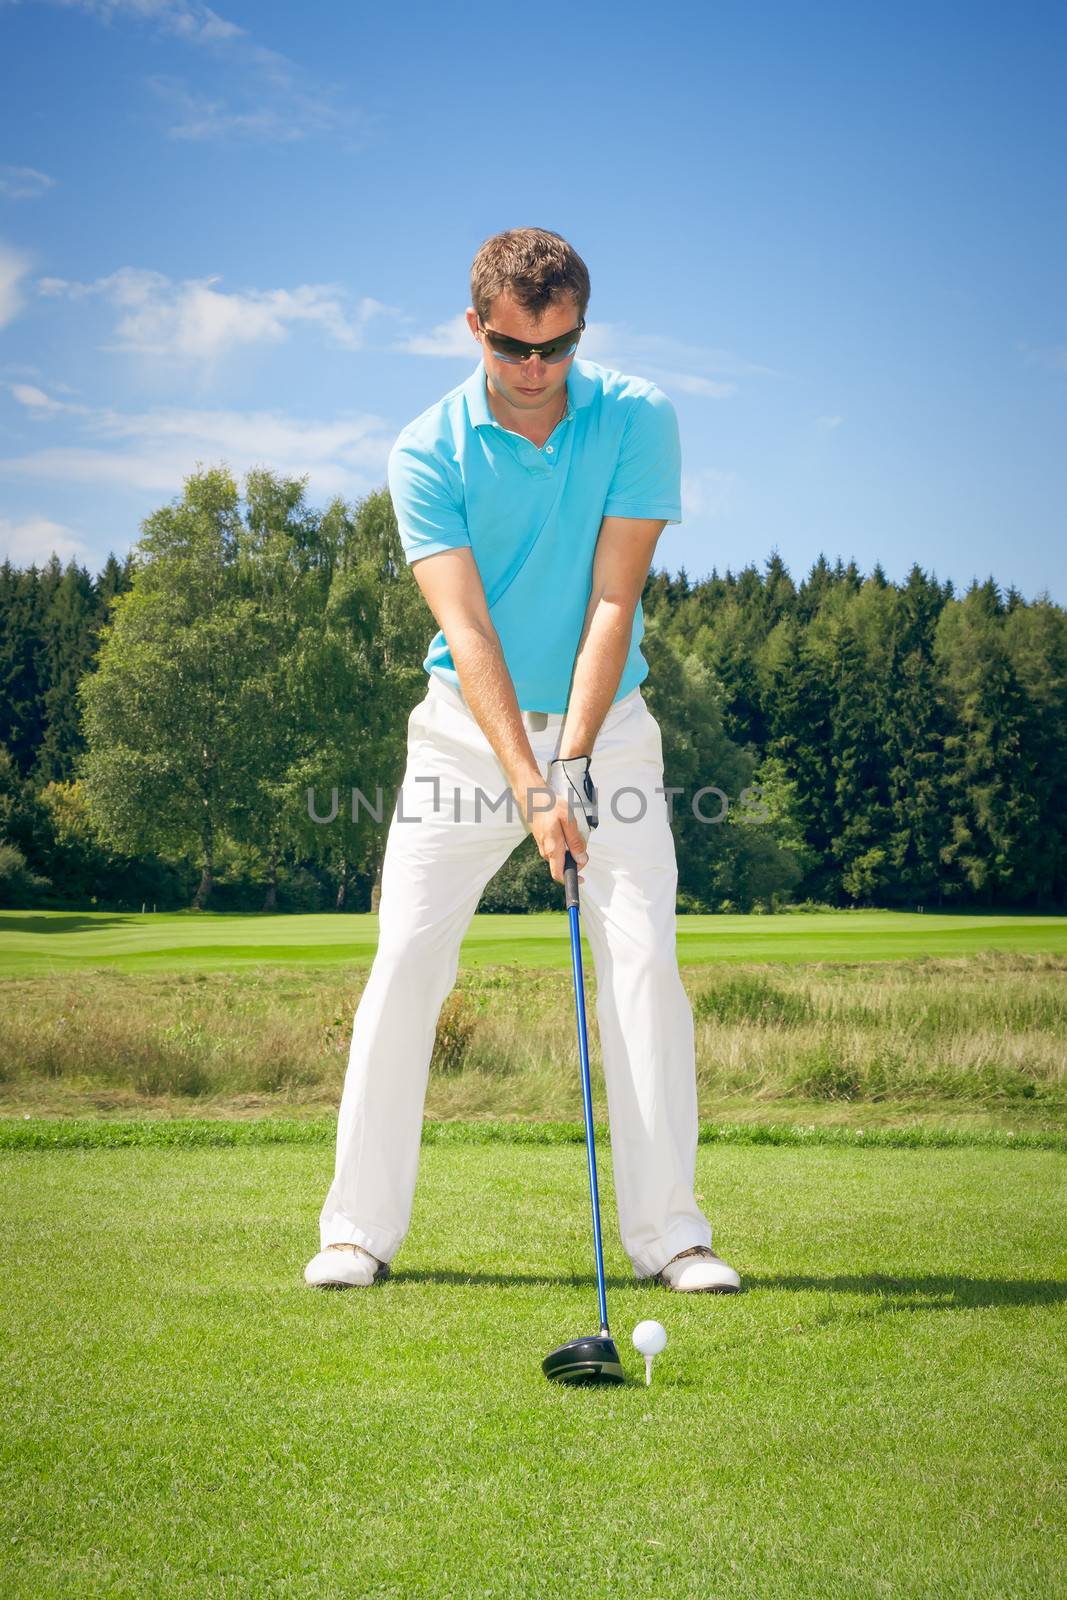 An image of a young male golf player